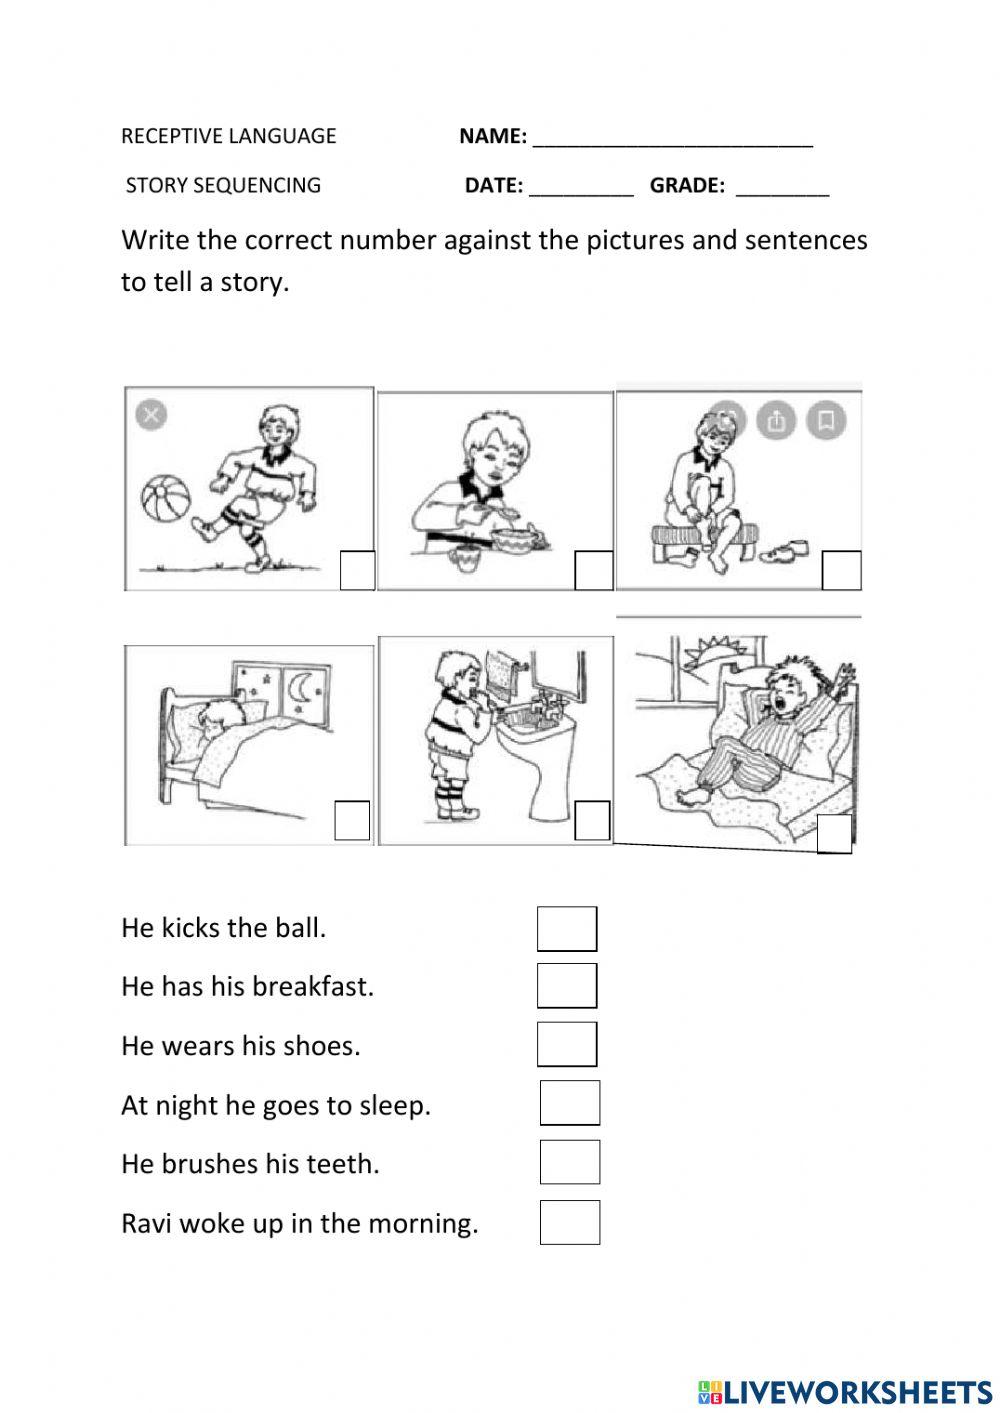 RECEPTIVE LANGUAGE -Story Sequencing